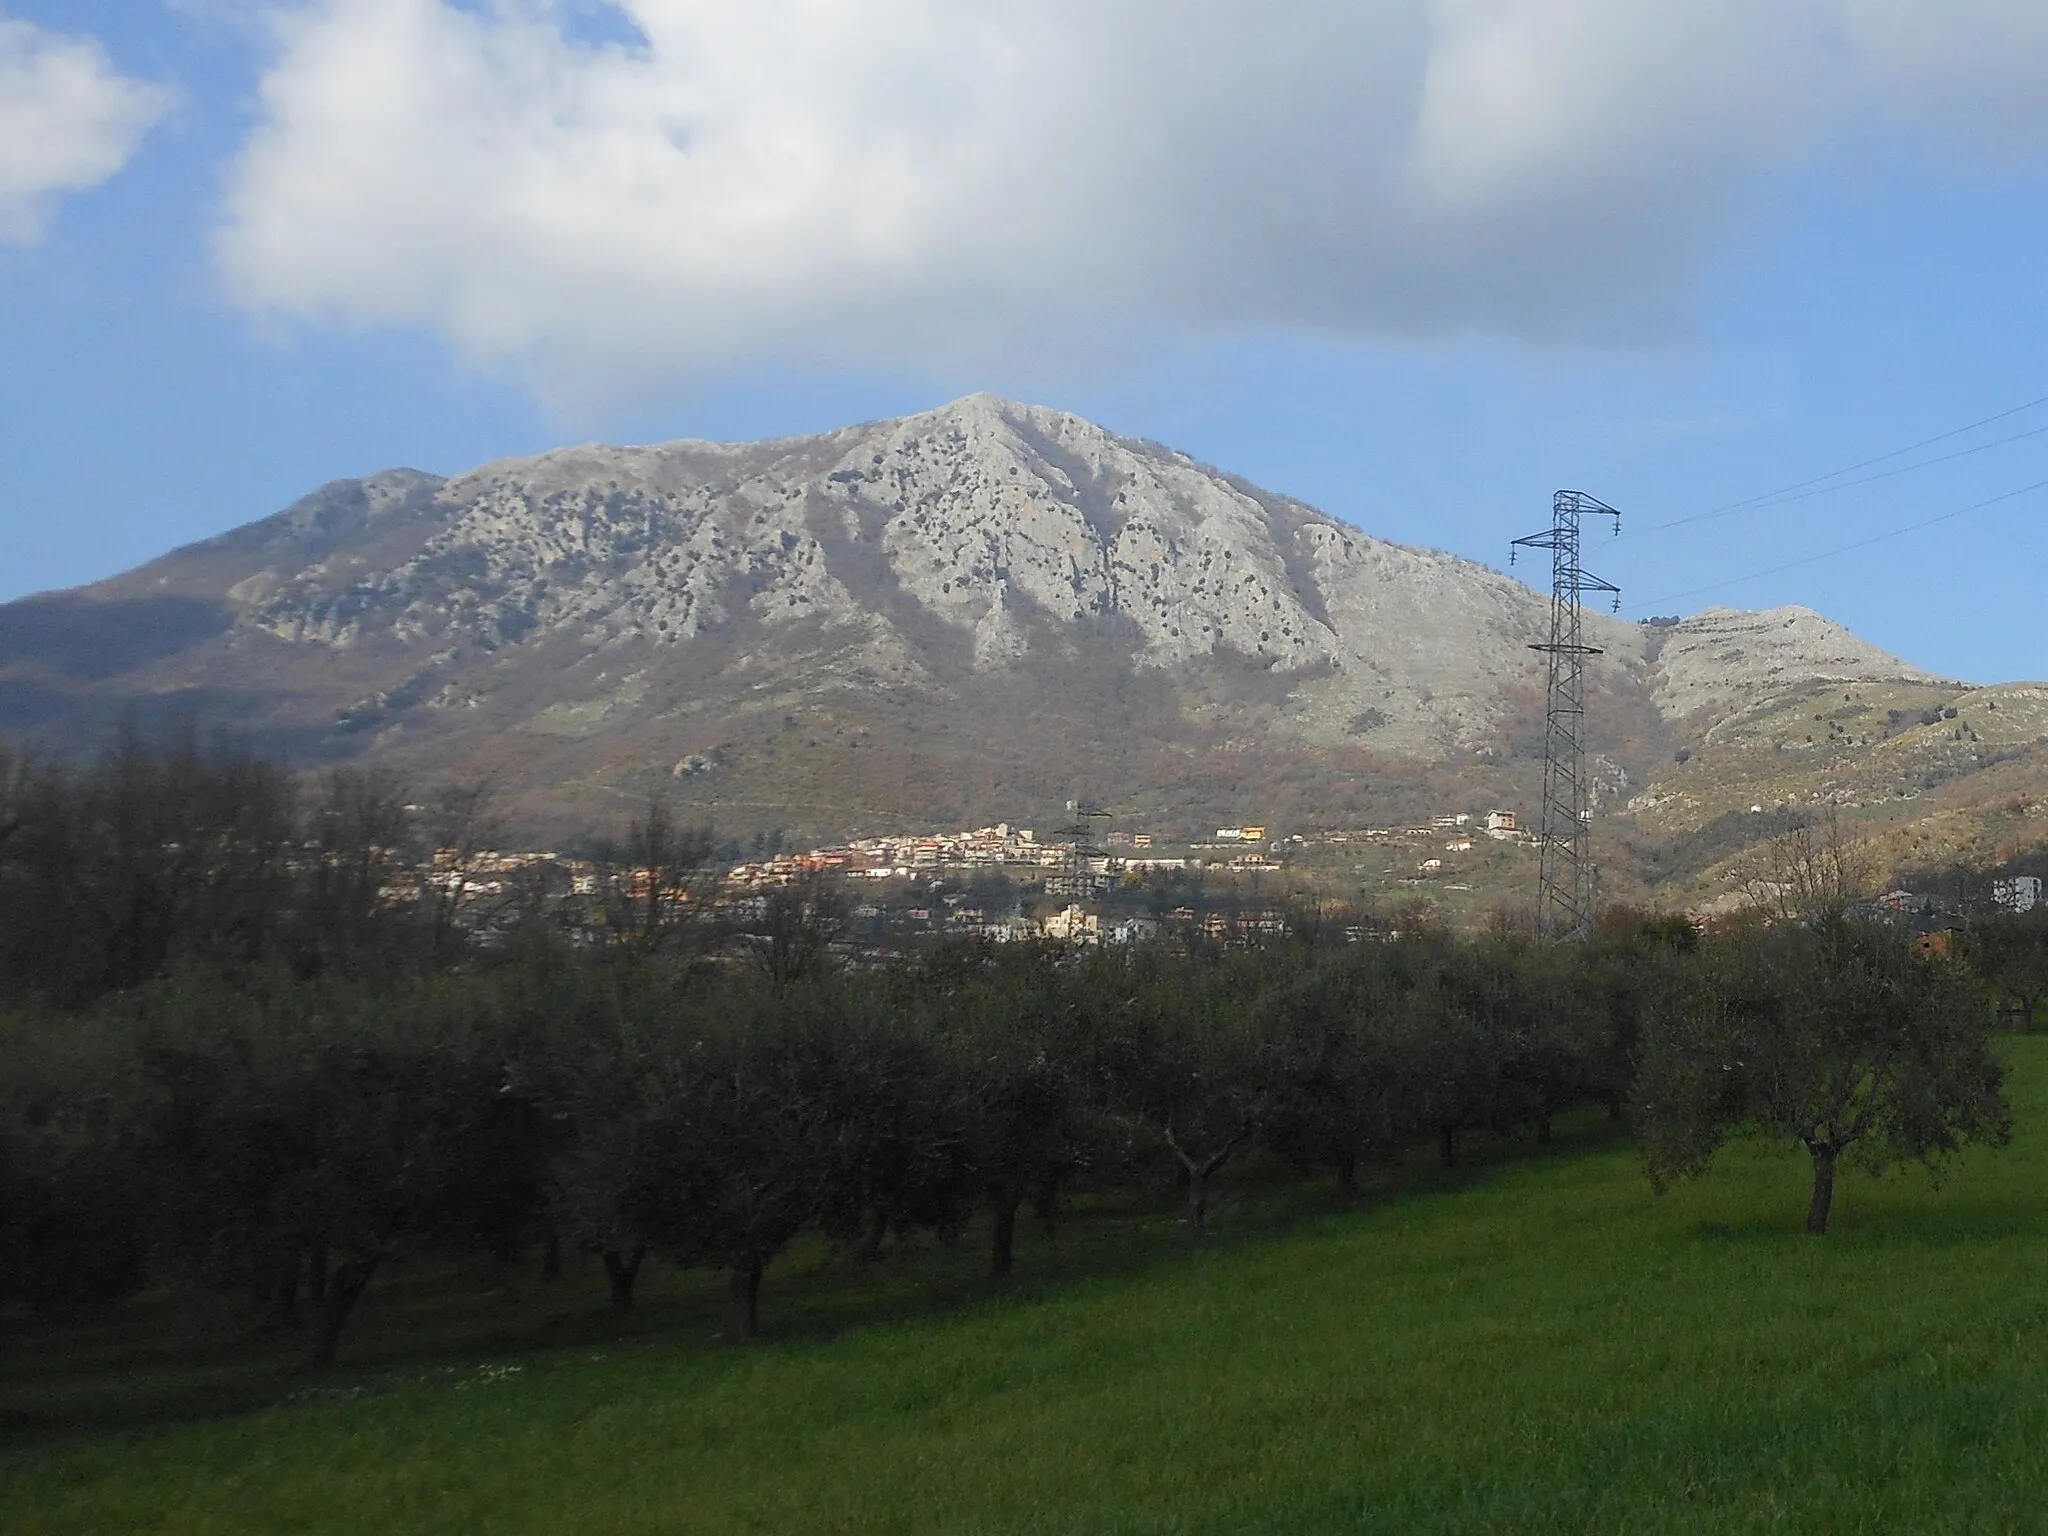 Photo showing: Mount Pèntime, part of the Taburno massif, with Vitulano at its feet plus olive trees in the "Vitulanese" Valley, Province of Benevento, Campania, Southern Italy.